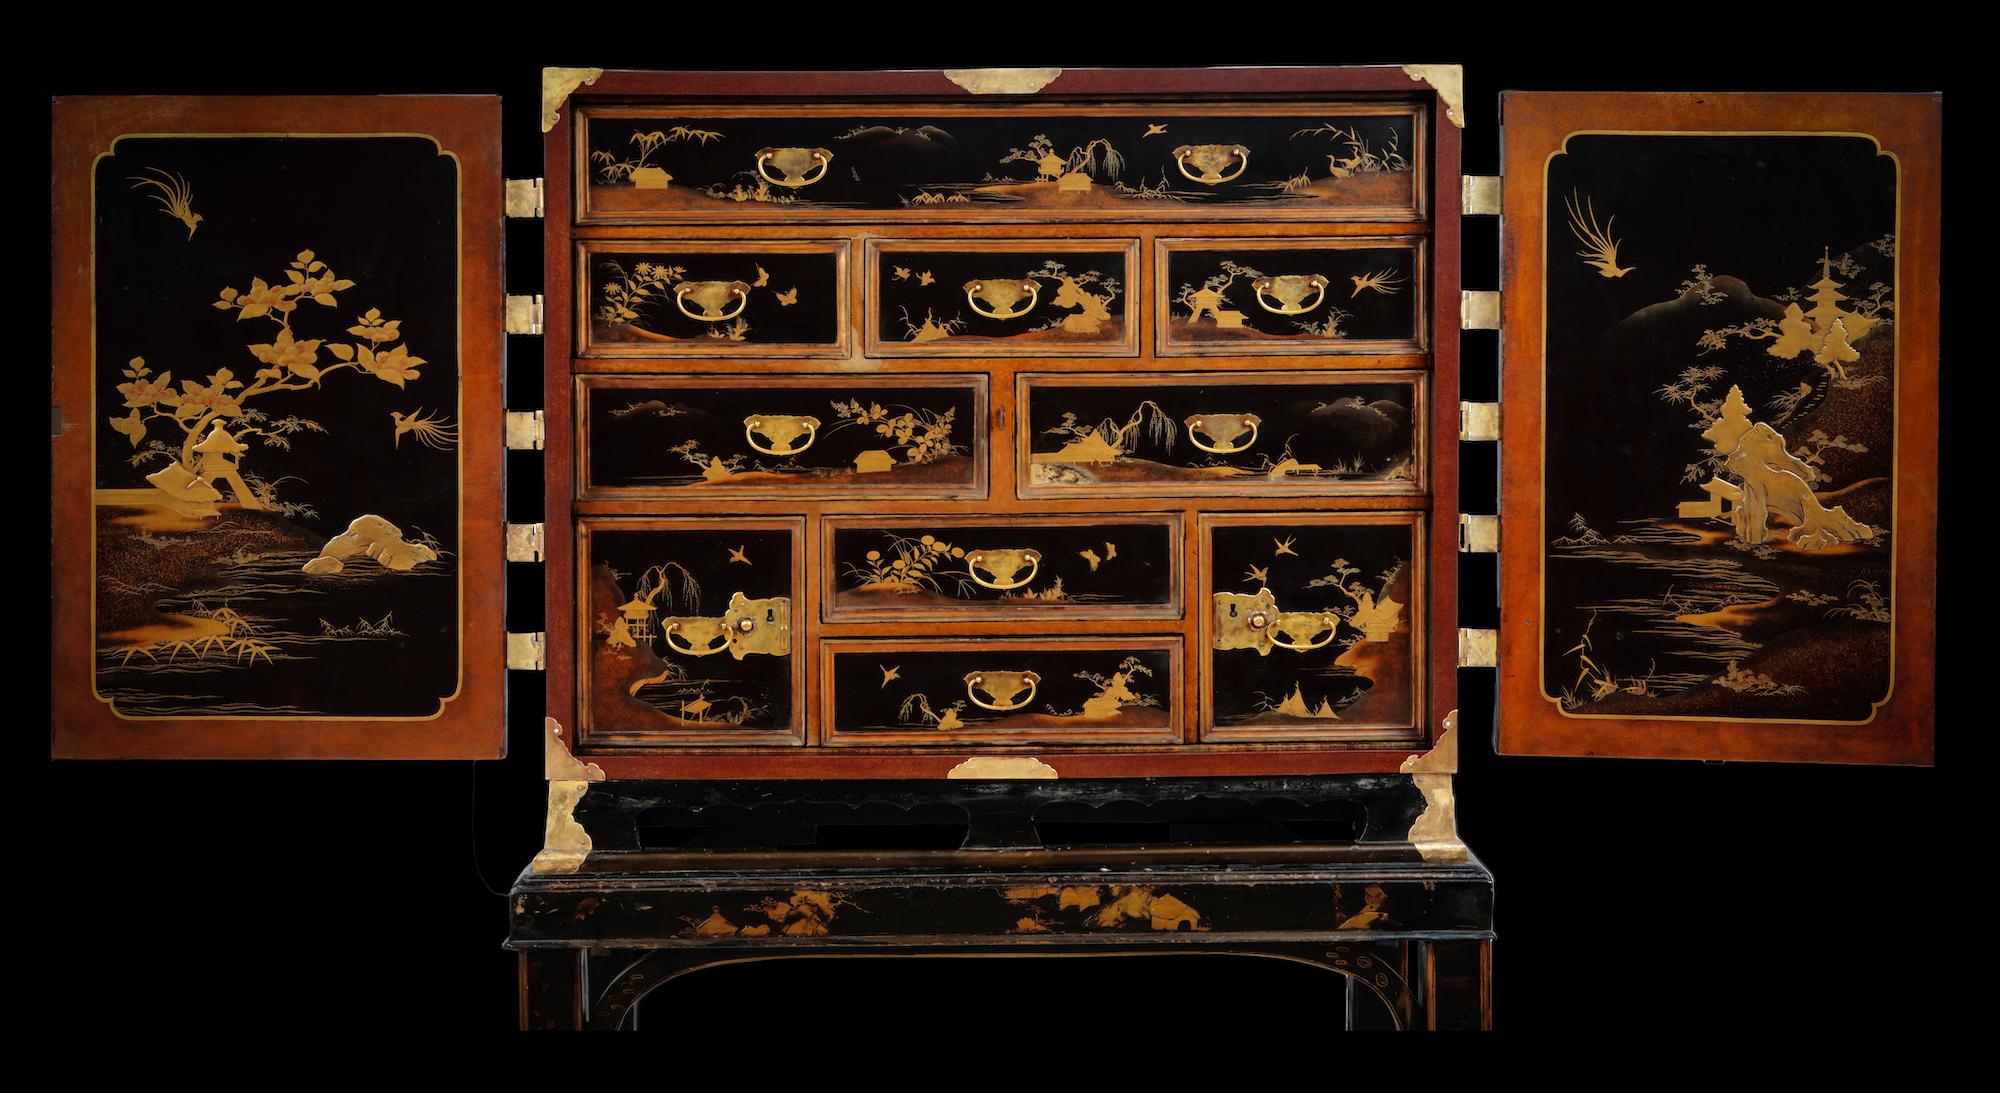 Edo 17th Century Japanese Export Lacquer Cabinet with Depiction the Dutch Tradepost For Sale